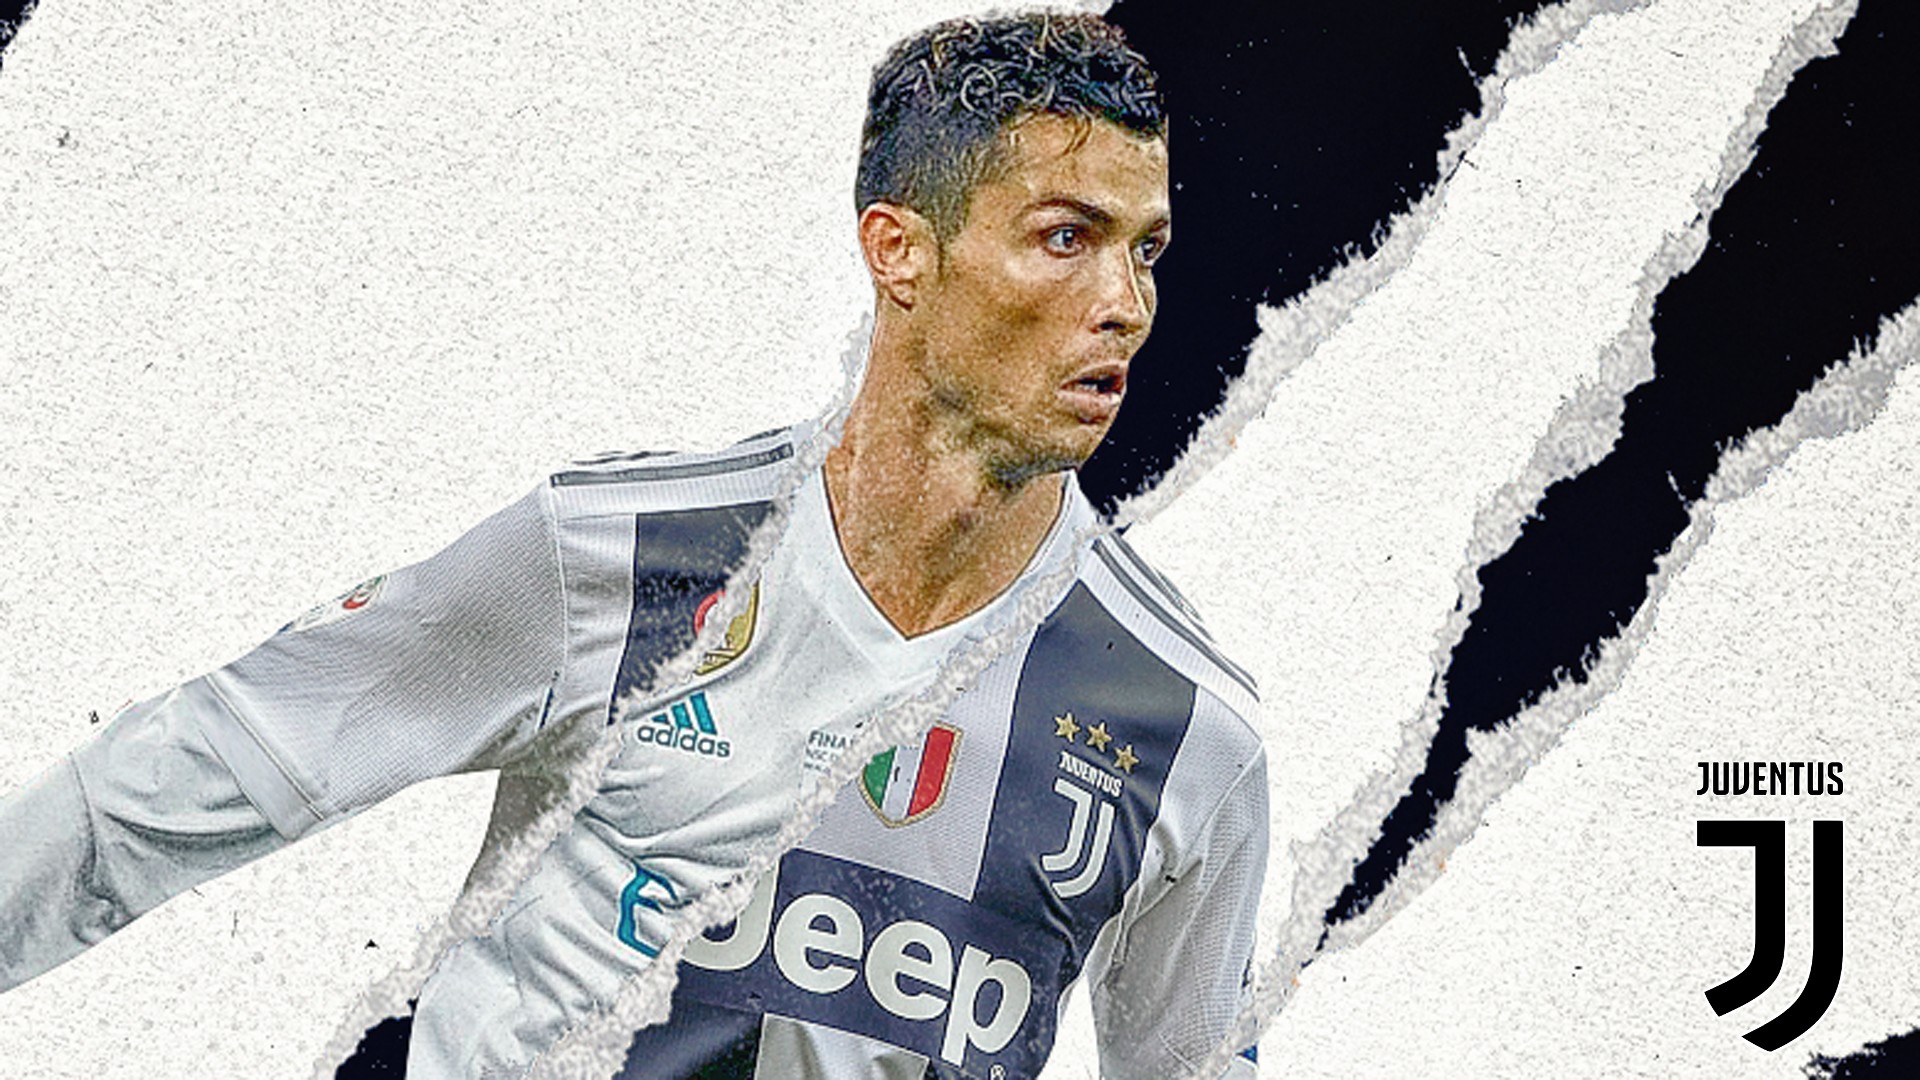 CR7 Juventus HD Wallpapers With Resolution 1920X1080 pixel. You can make this wallpaper for your Mac or Windows Desktop Background, iPhone, Android or Tablet and another Smartphone device for free